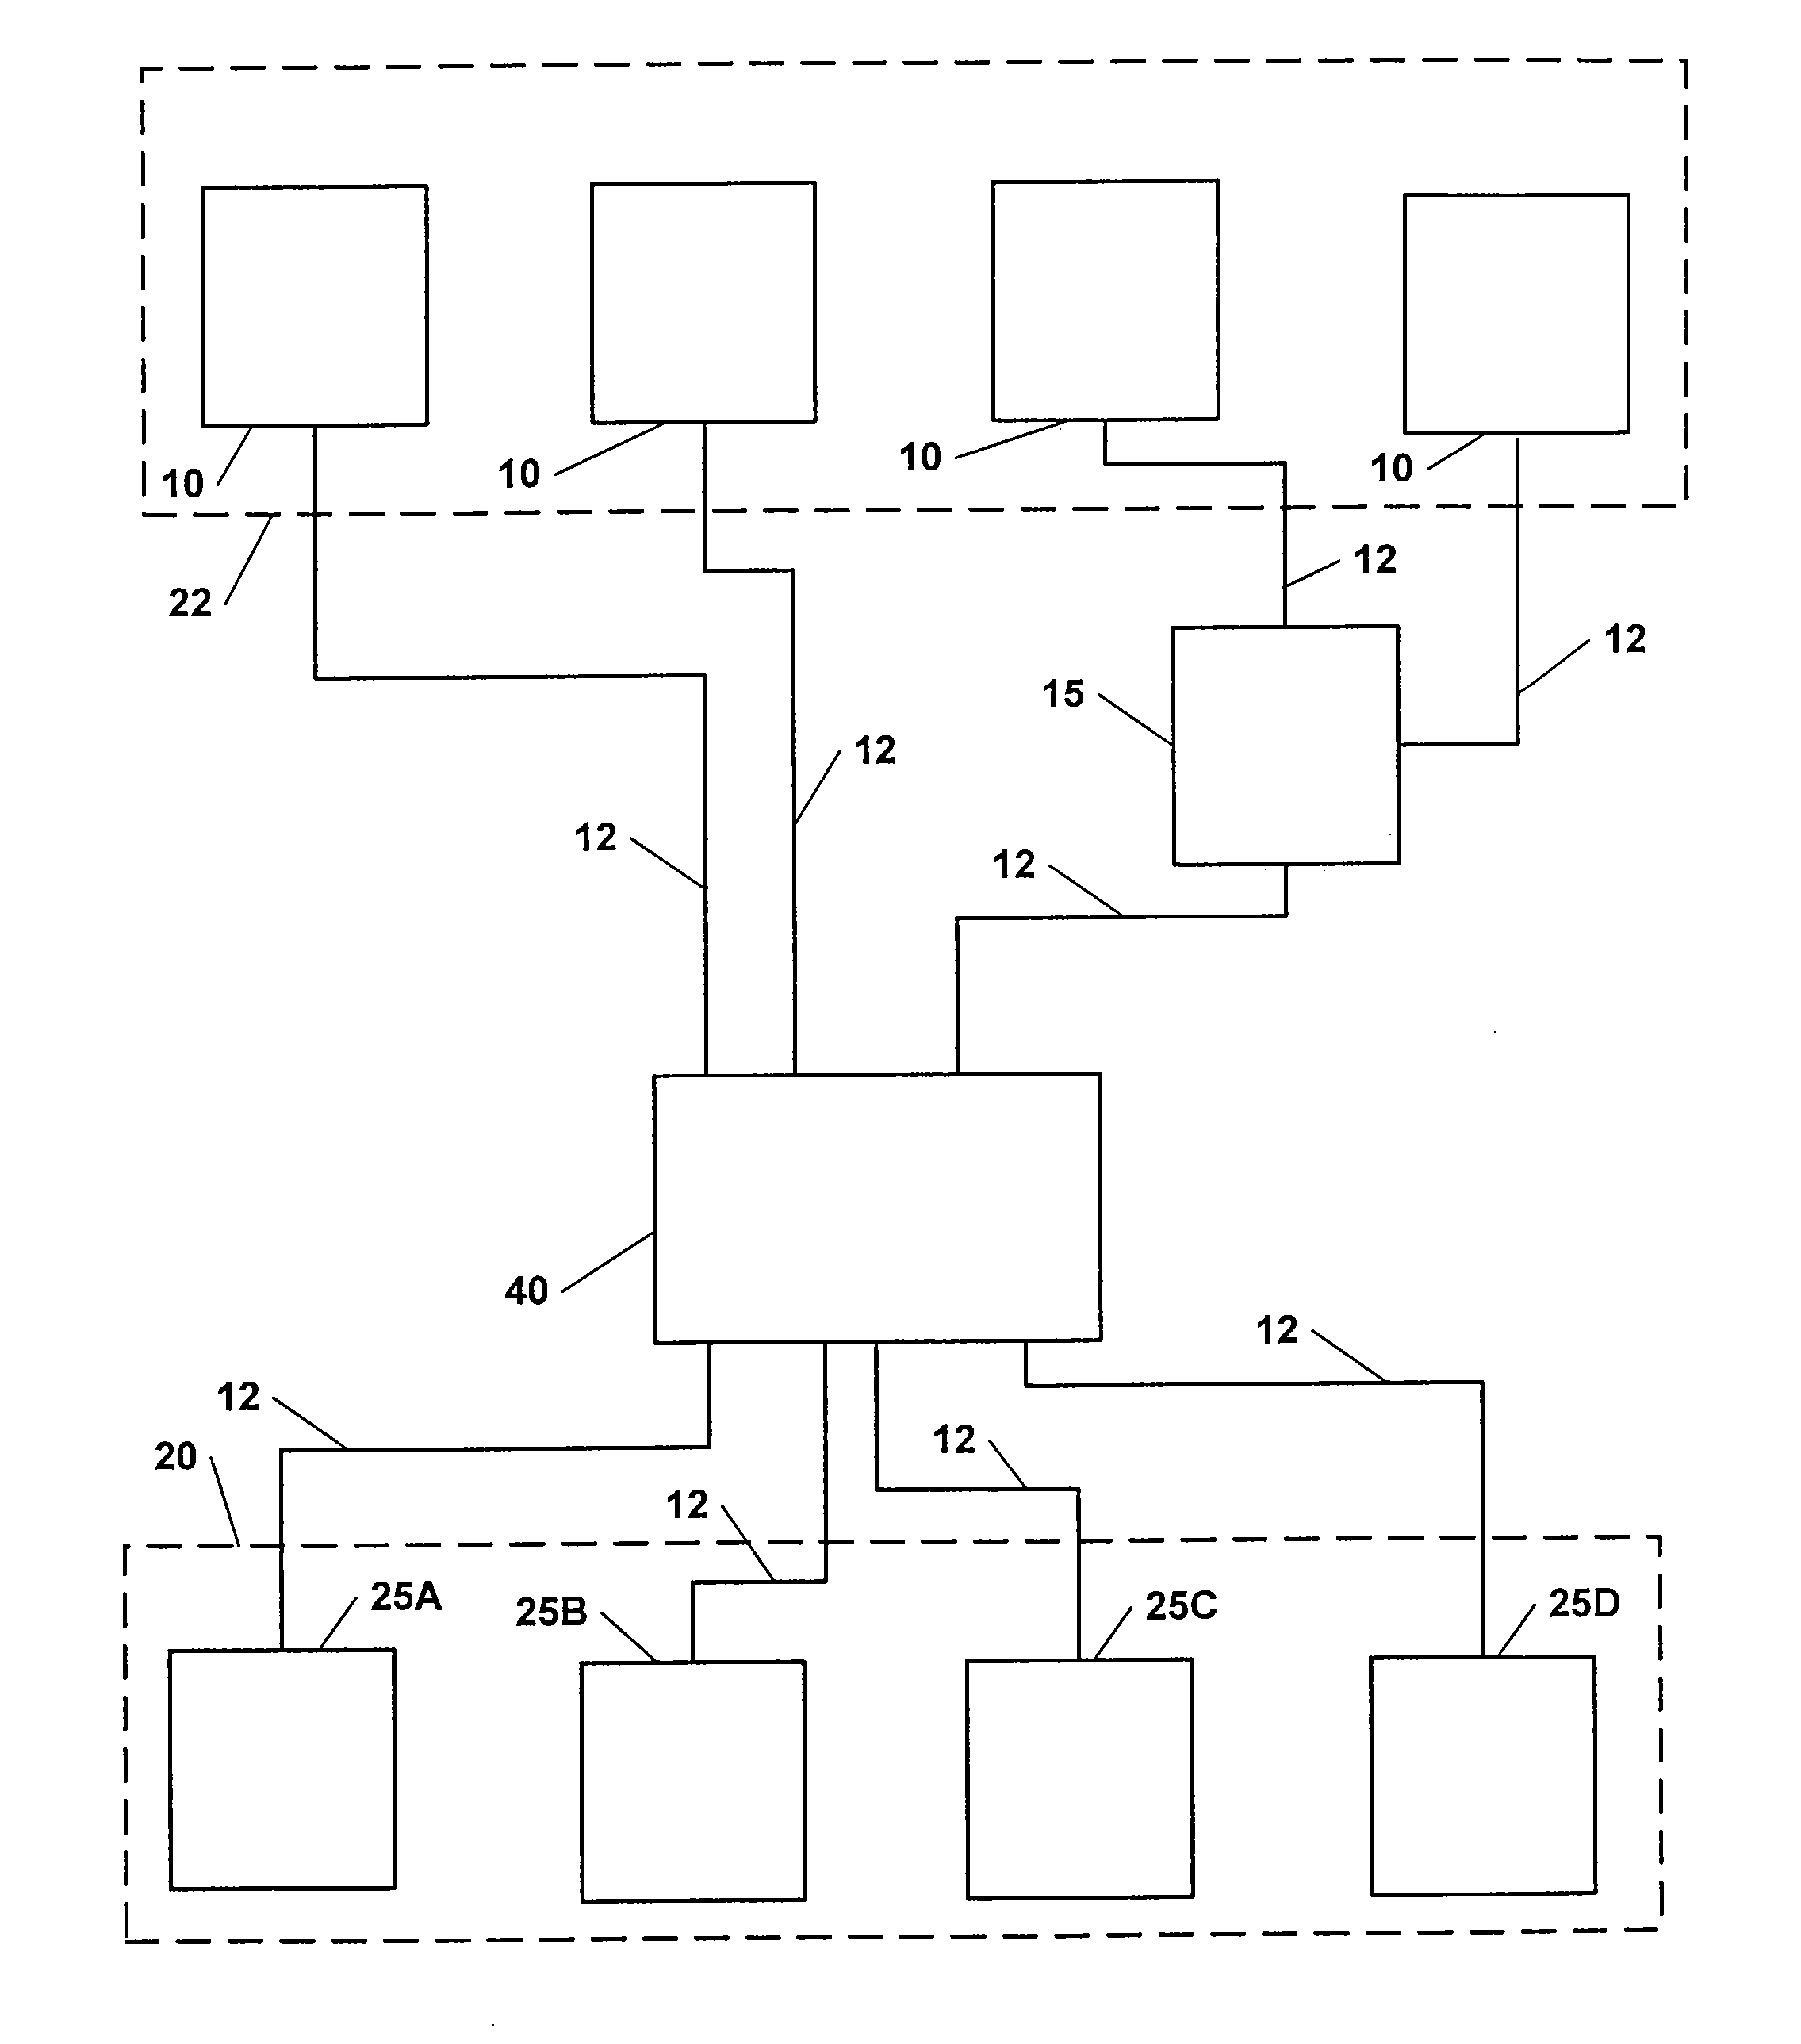 System and method for processing and distributing freight containers